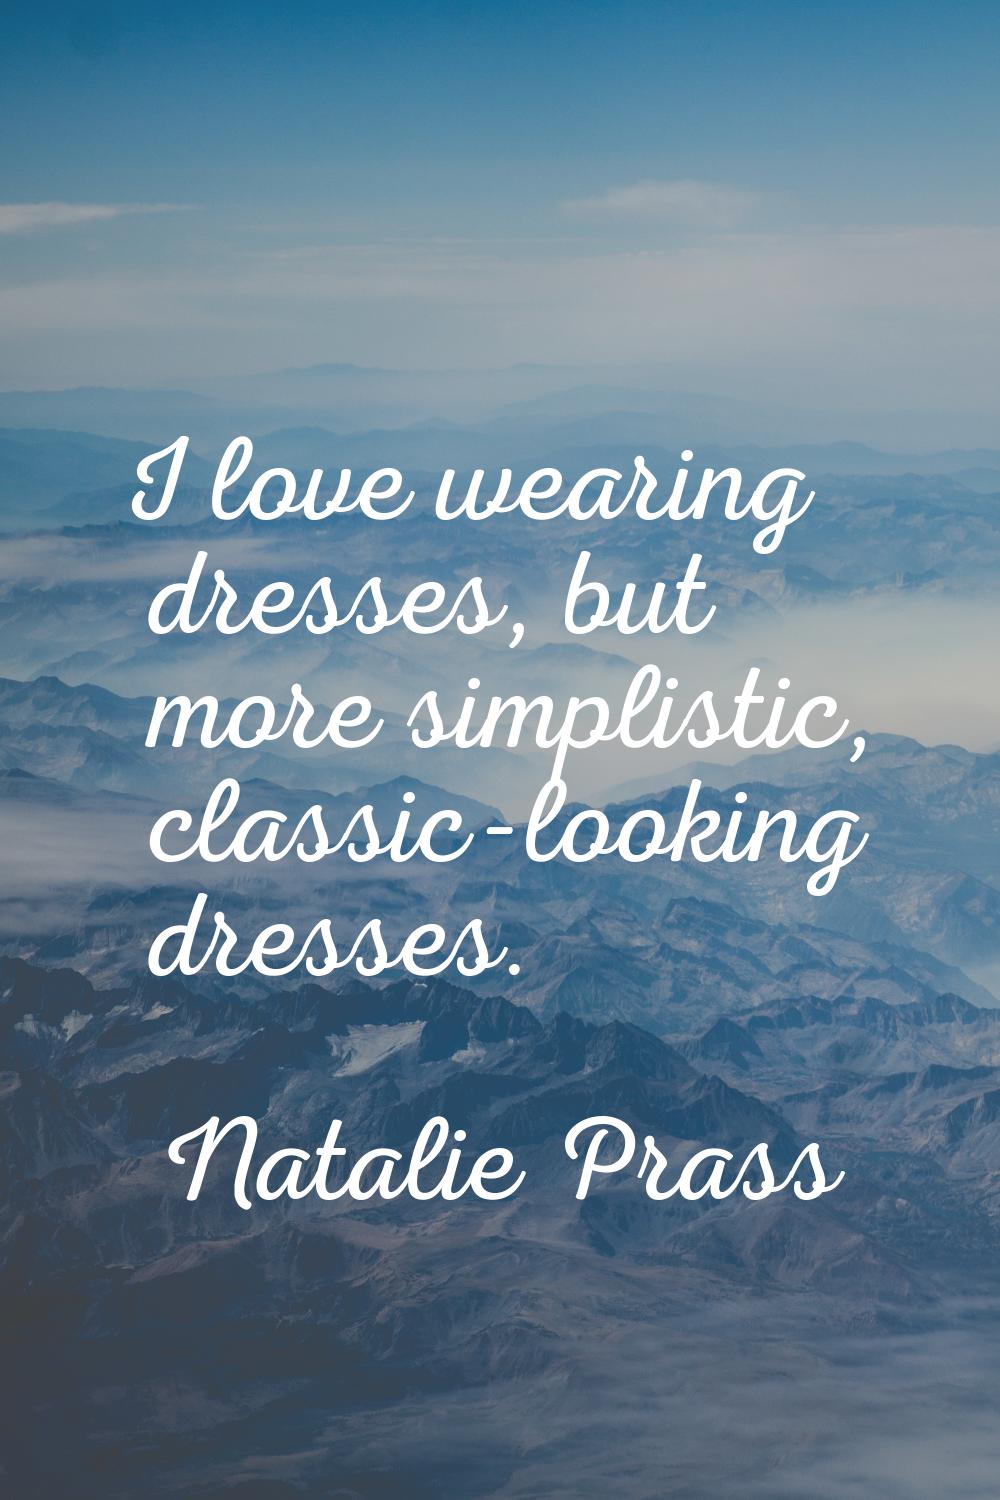 I love wearing dresses, but more simplistic, classic-looking dresses.